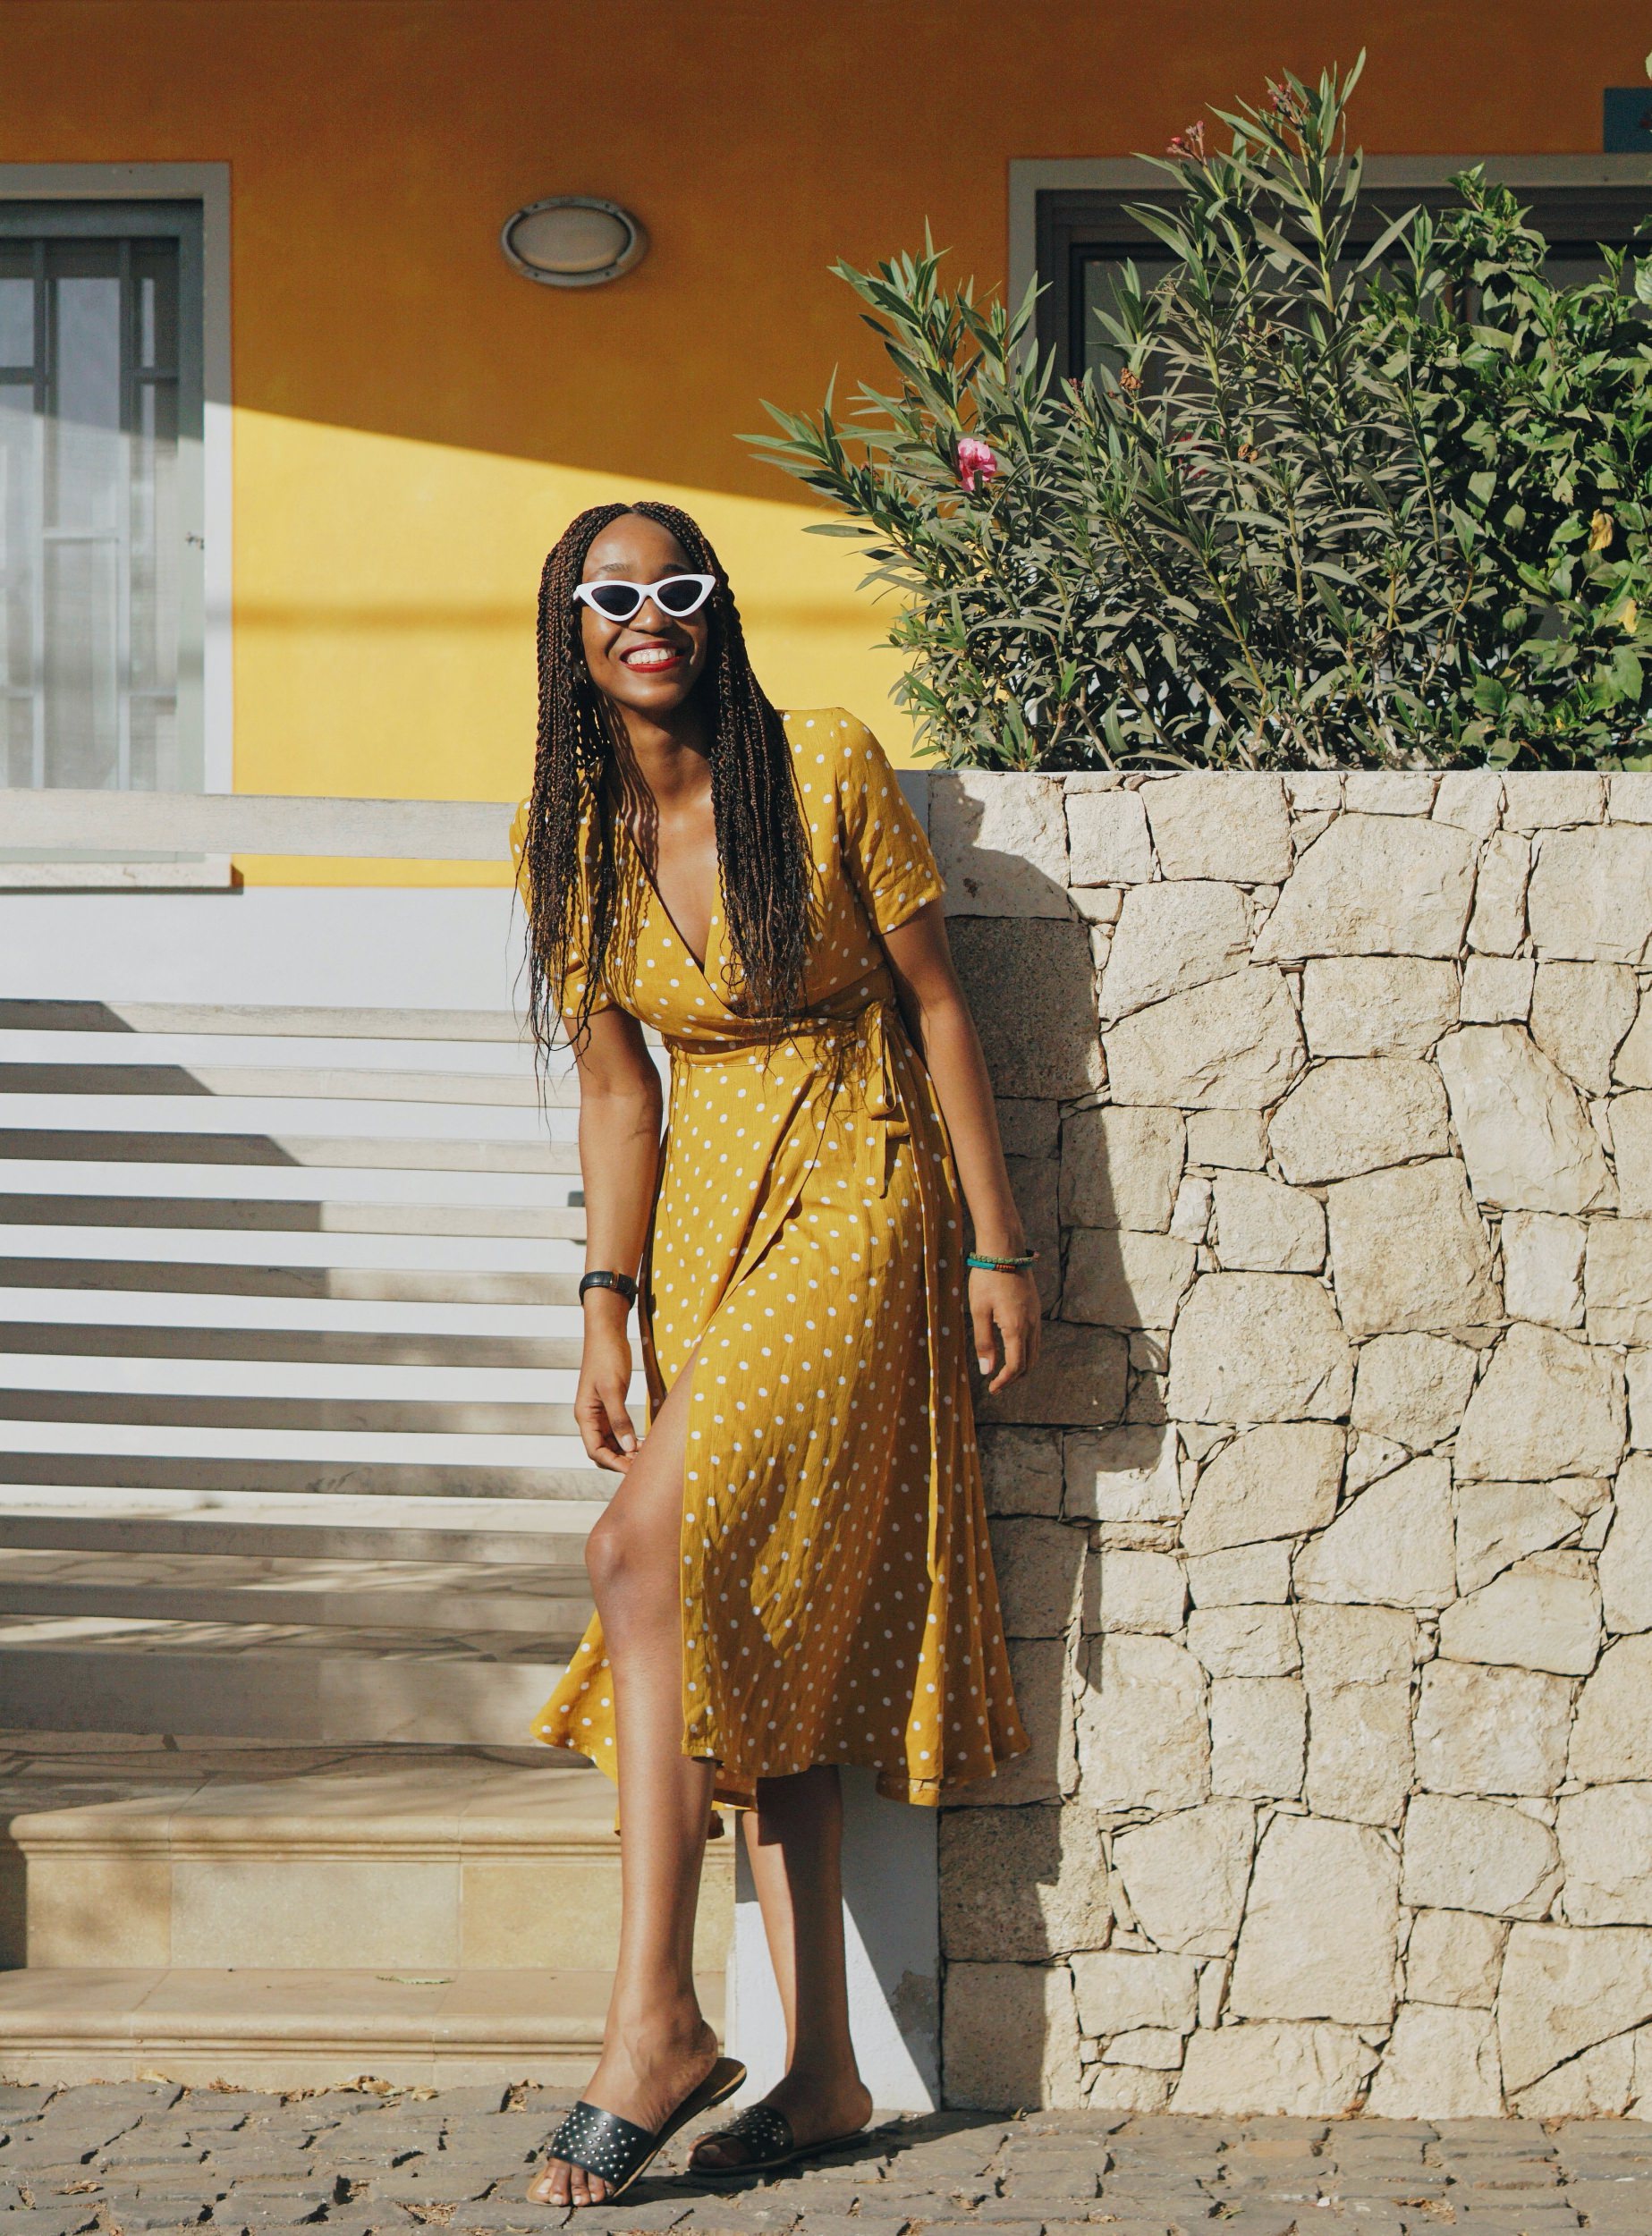 Cassie Daves wearing a yellow polka dot dress posing in front of a yellow house 